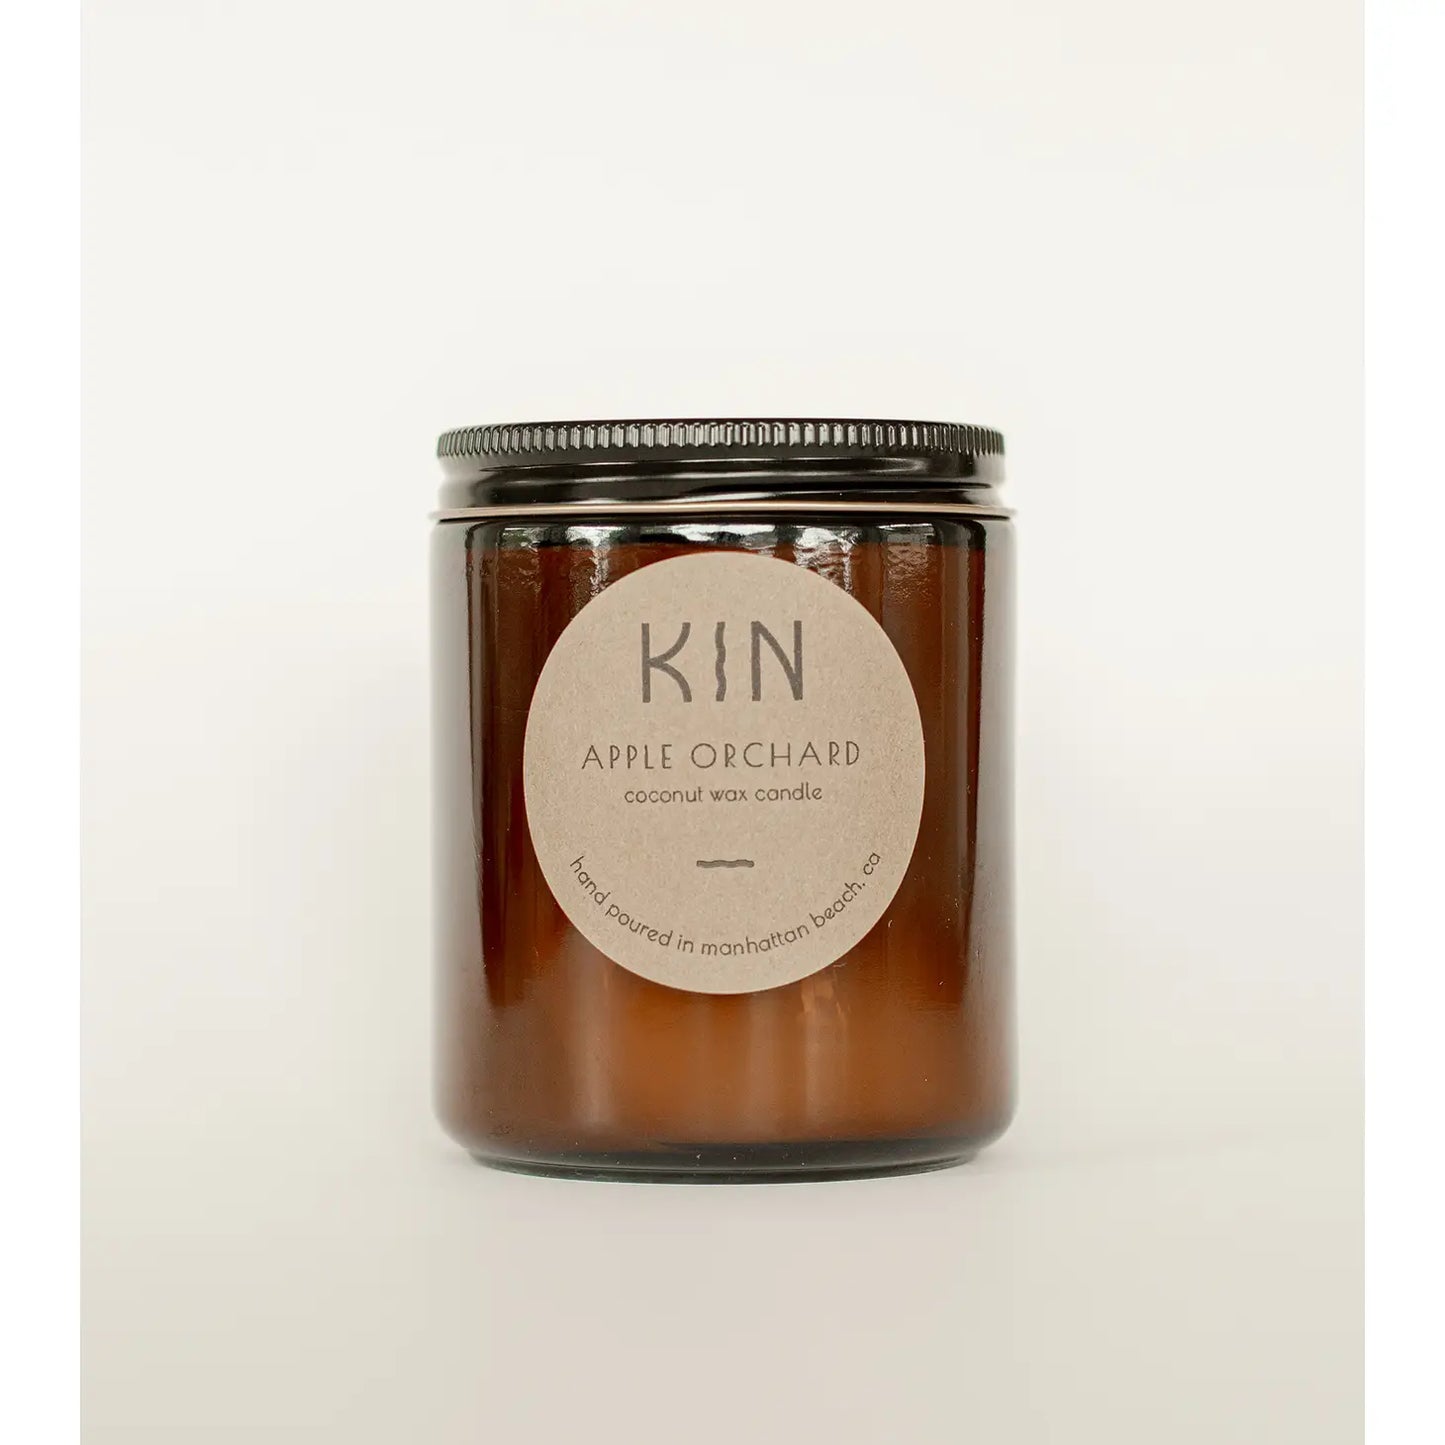 Apple Orchard Kin Candle